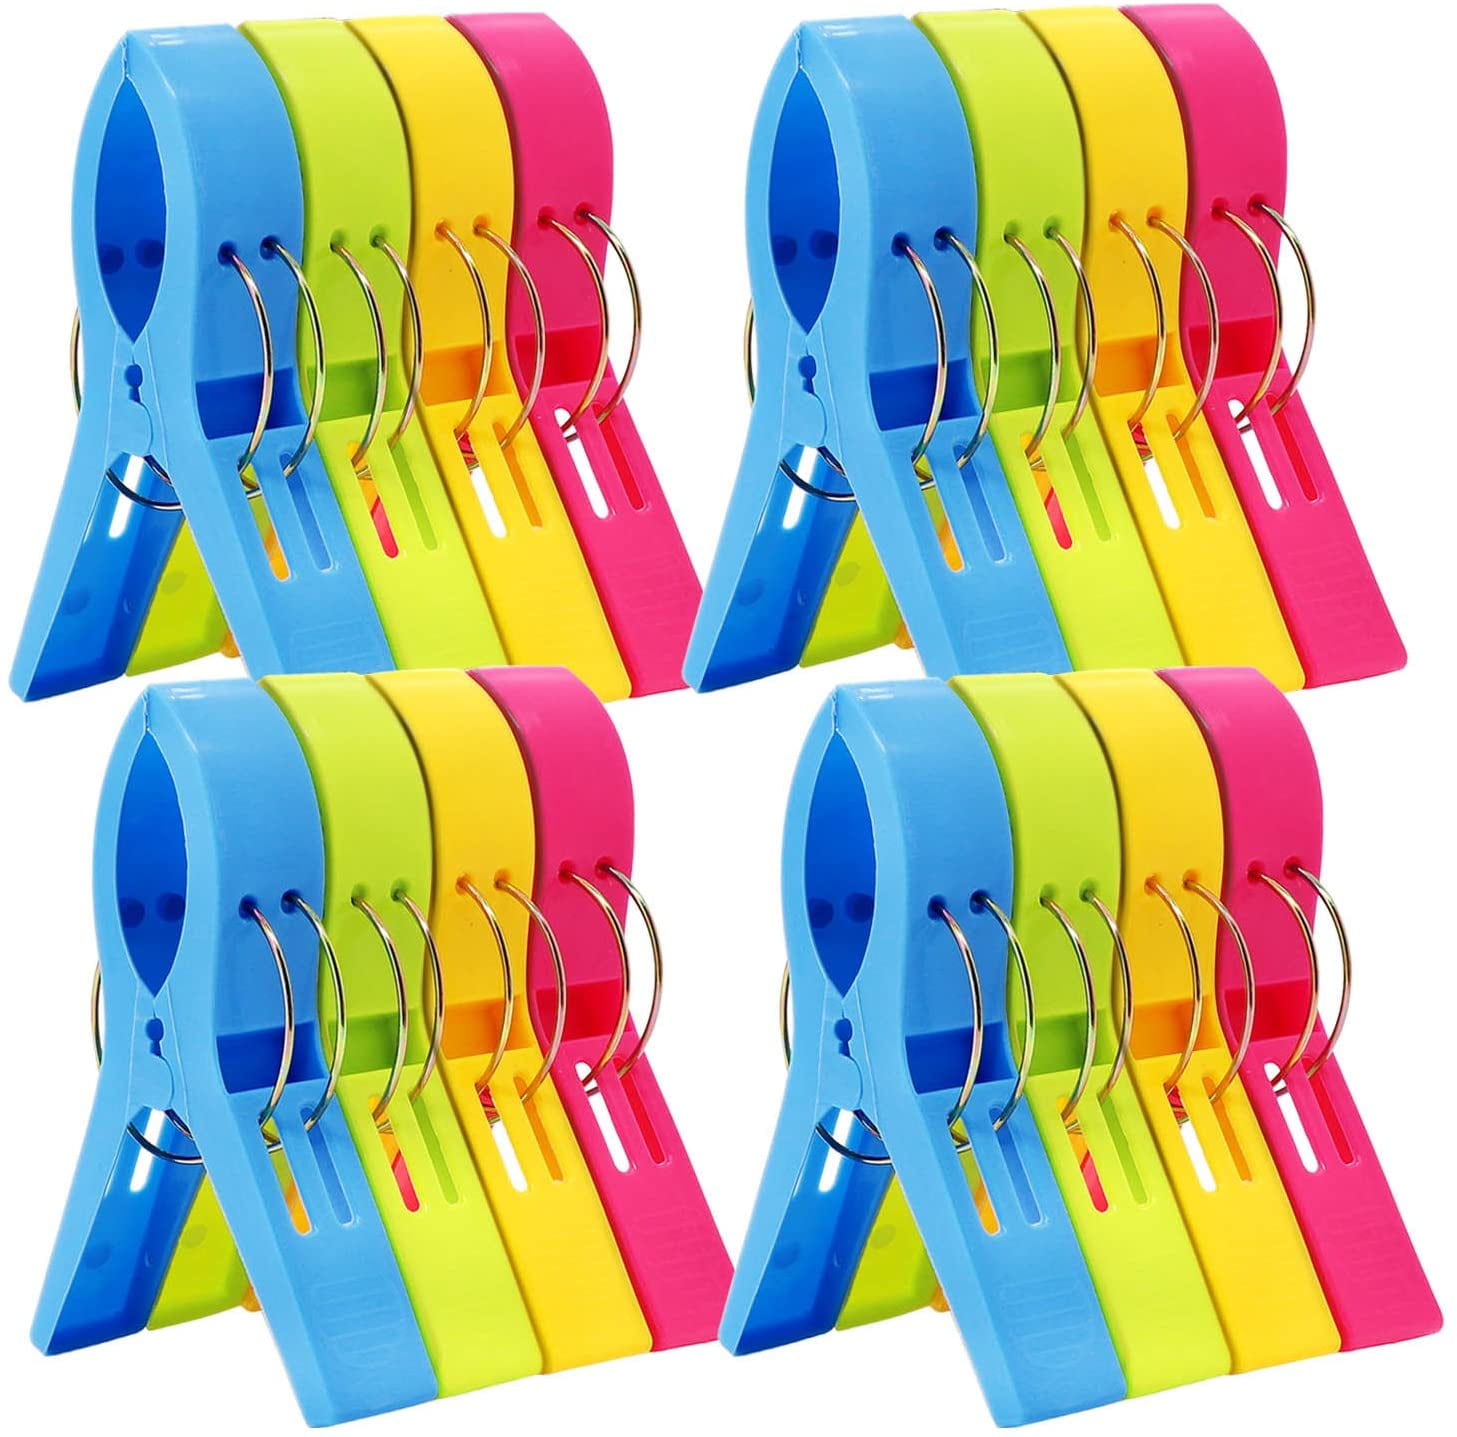 HiGift 8 Pack Beach Towel Clips for Beach Chairs Cruise Chair,Jumbo Size Cruise Chair Towel Clips On Lounge Chairs Lawn Chair Pool Chairs in Bright Color-Keep Your Towel from Blowing Away-6.3 Inch